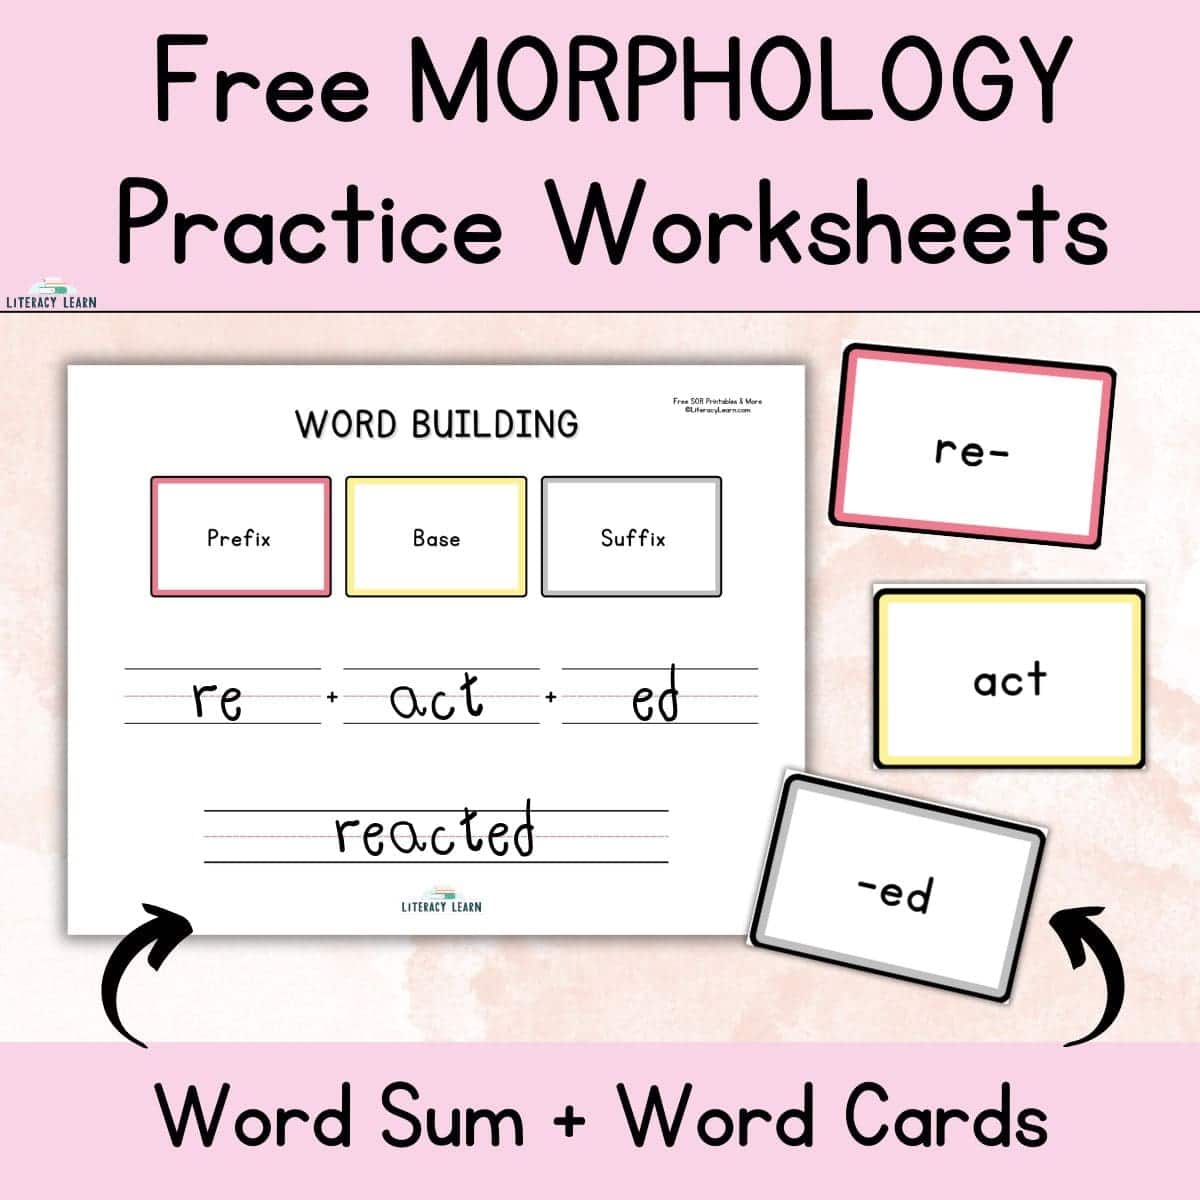 Pink graphic titled "Free Morphology Practice Worksheet" with word sum and word card practice sheets.